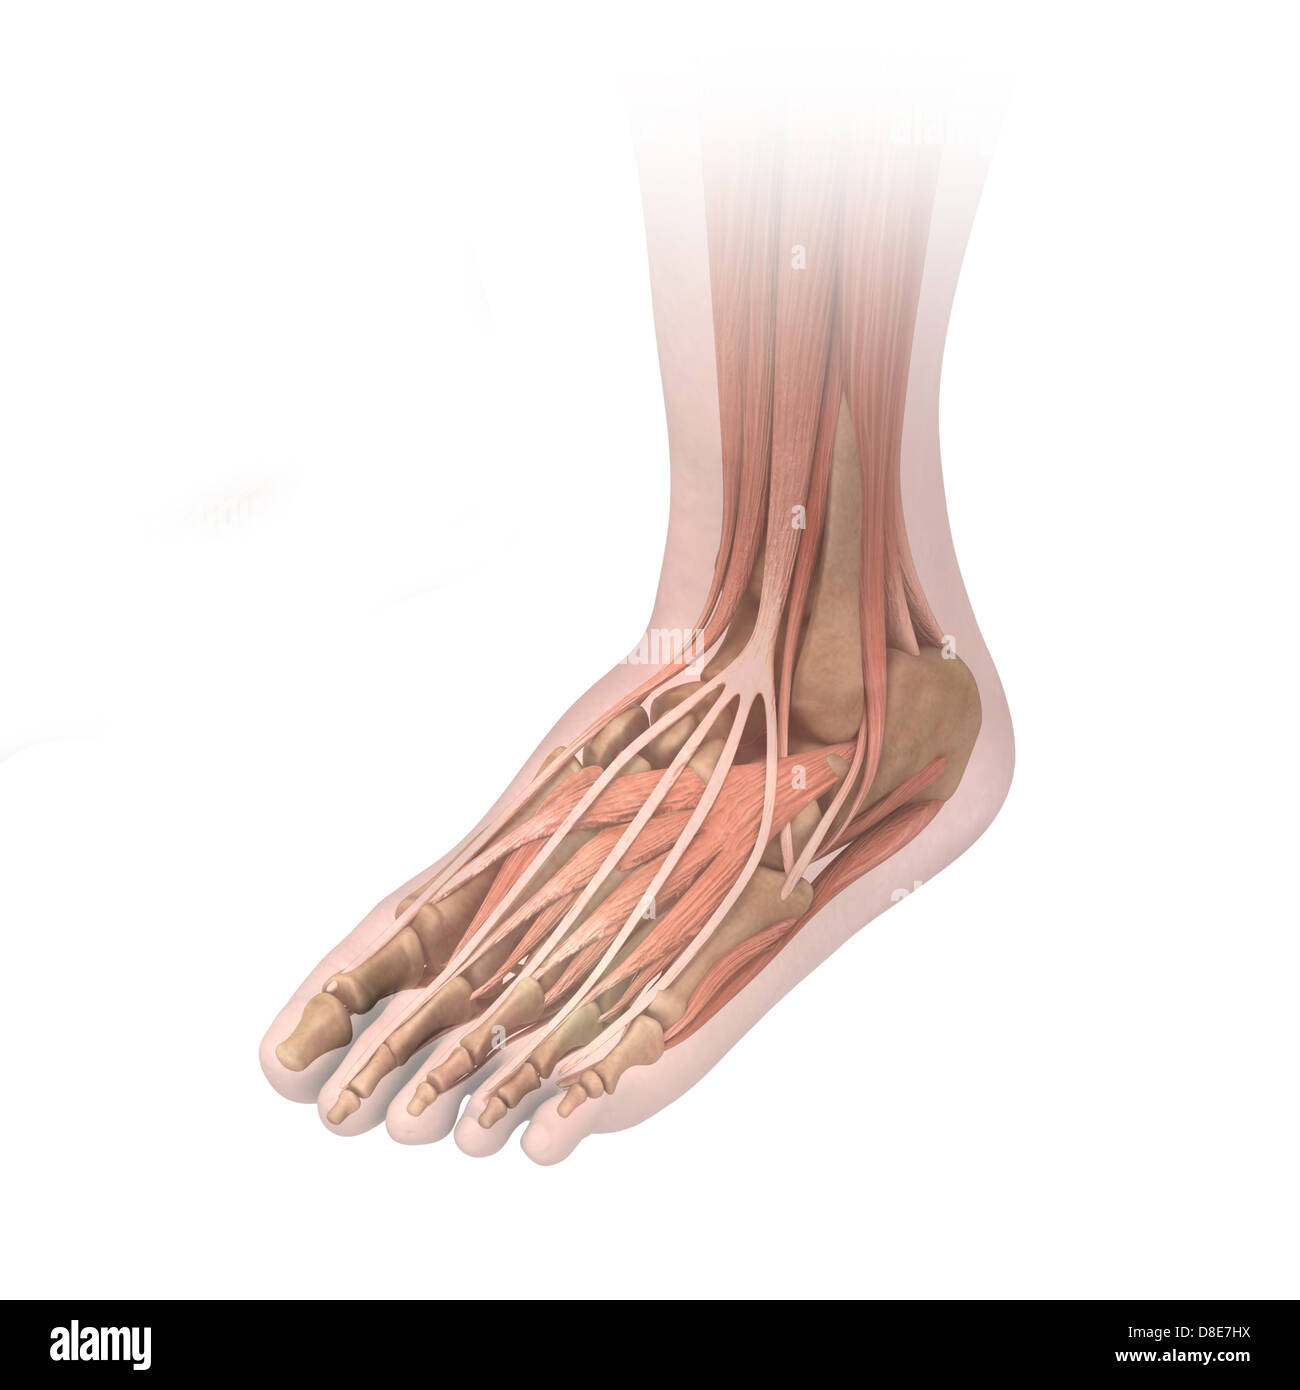 Illustration of a foot Stock Photo